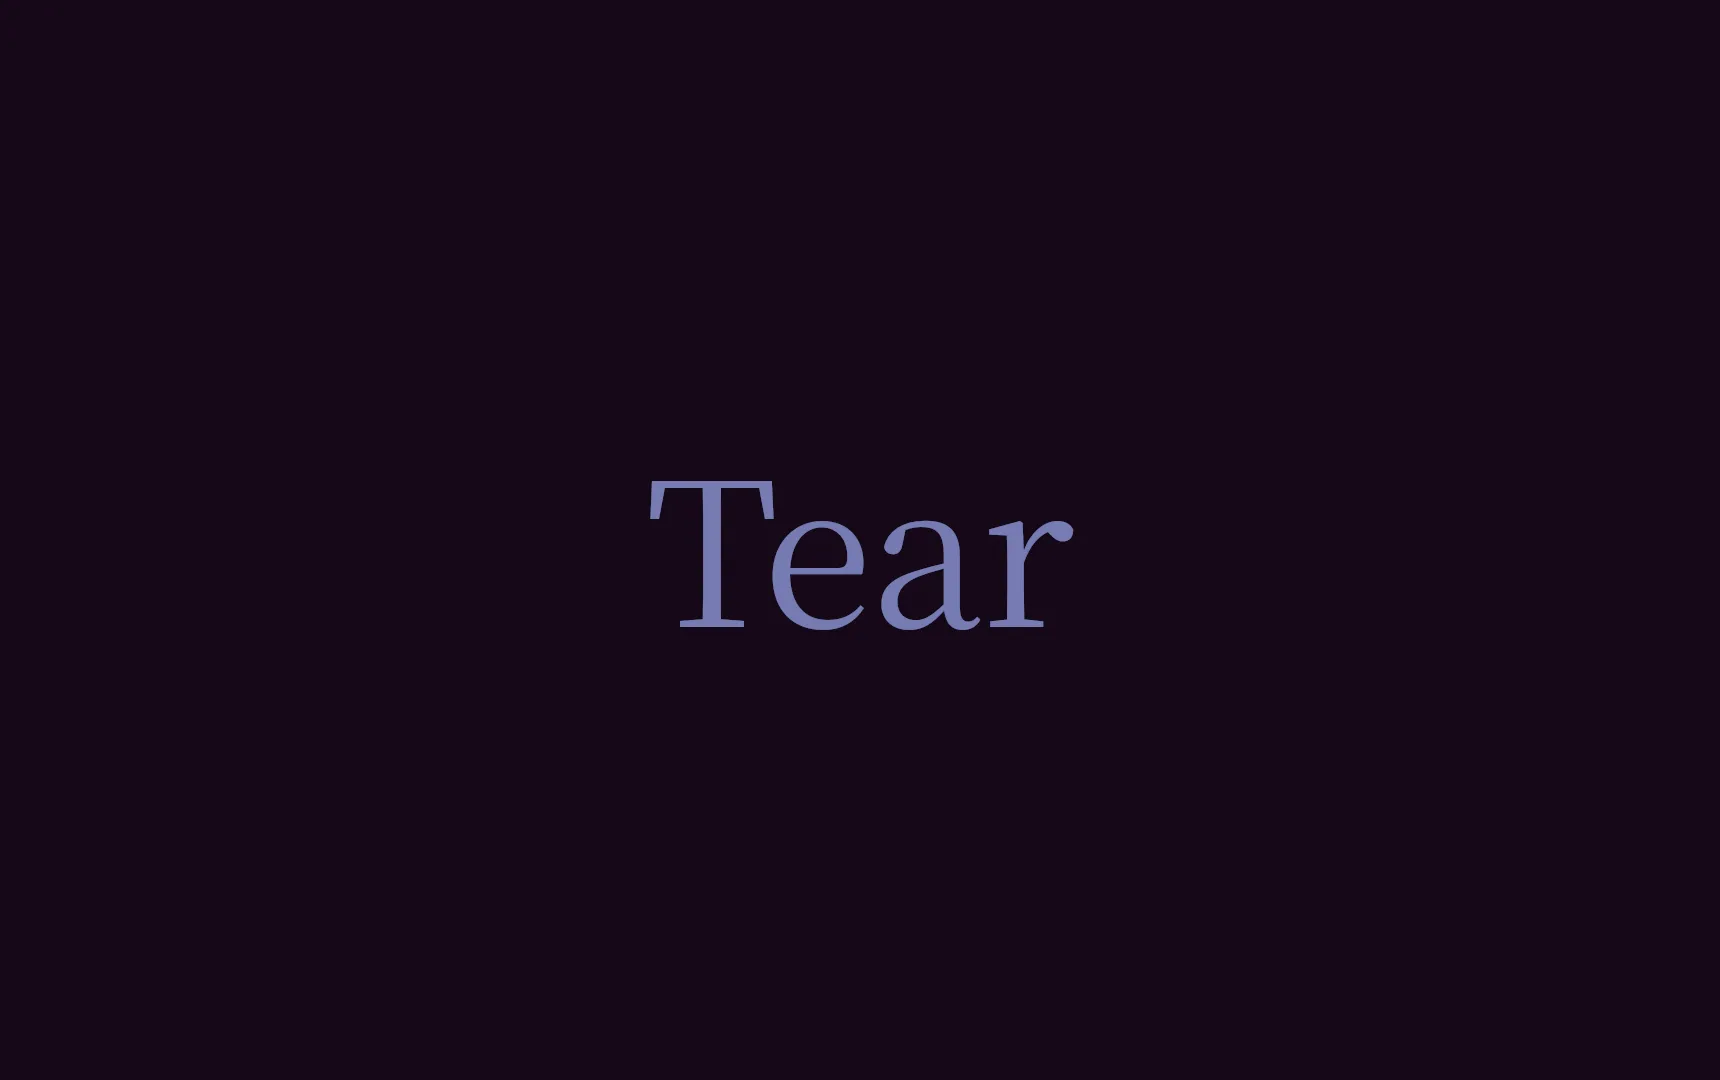 The logotype of Tear.